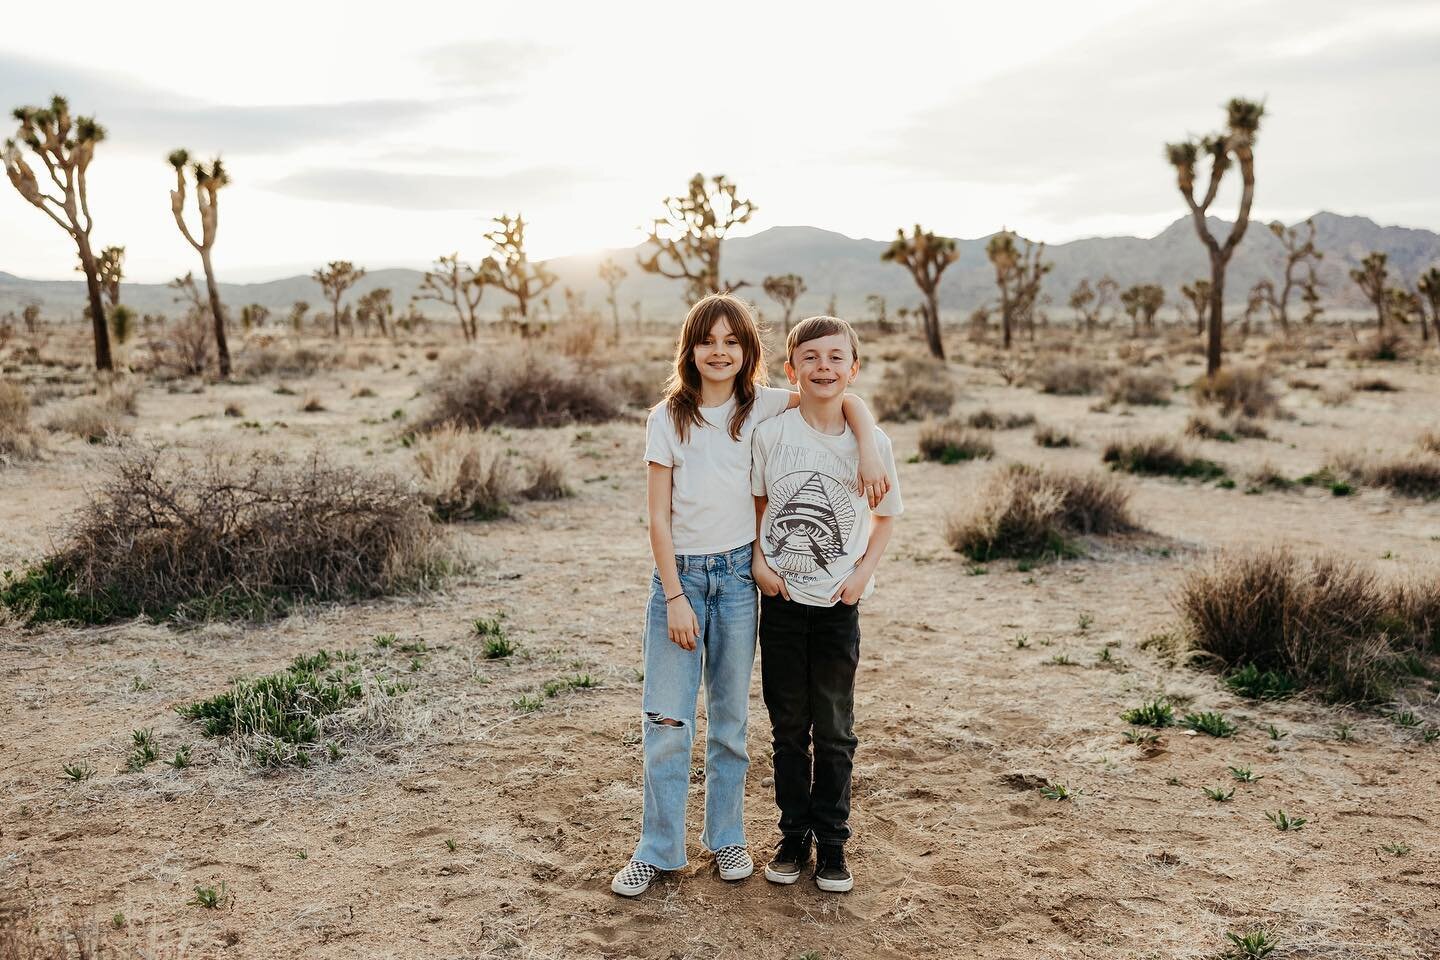 Photos of my kids on our recent trip to Joshua Tree.  We had a blast!